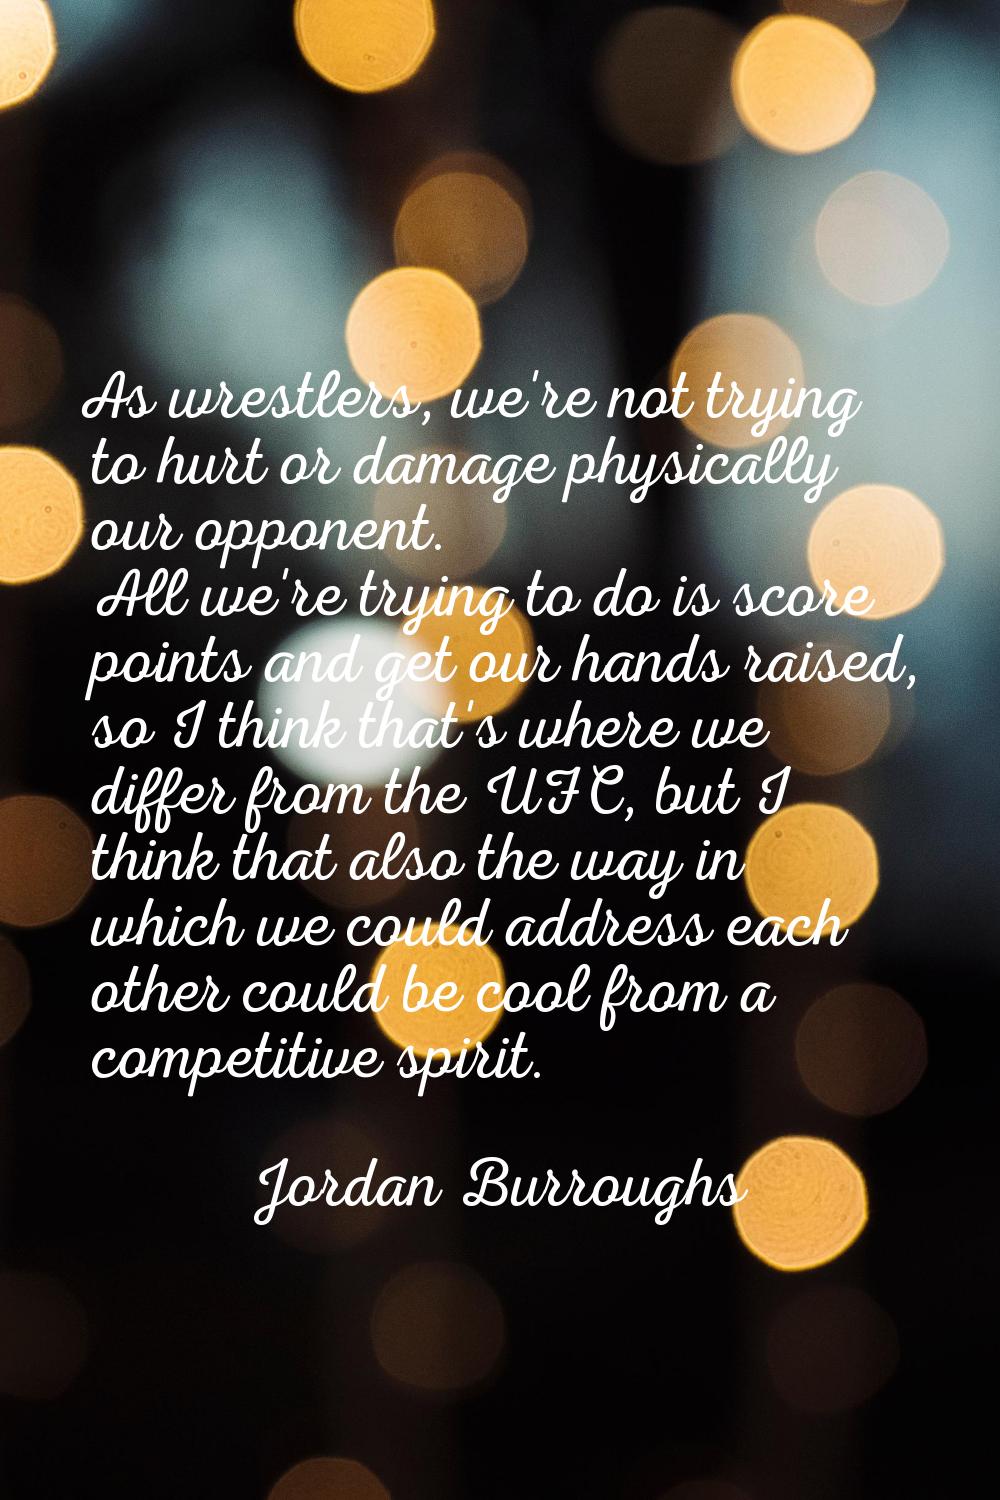 As wrestlers, we're not trying to hurt or damage physically our opponent. All we're trying to do is